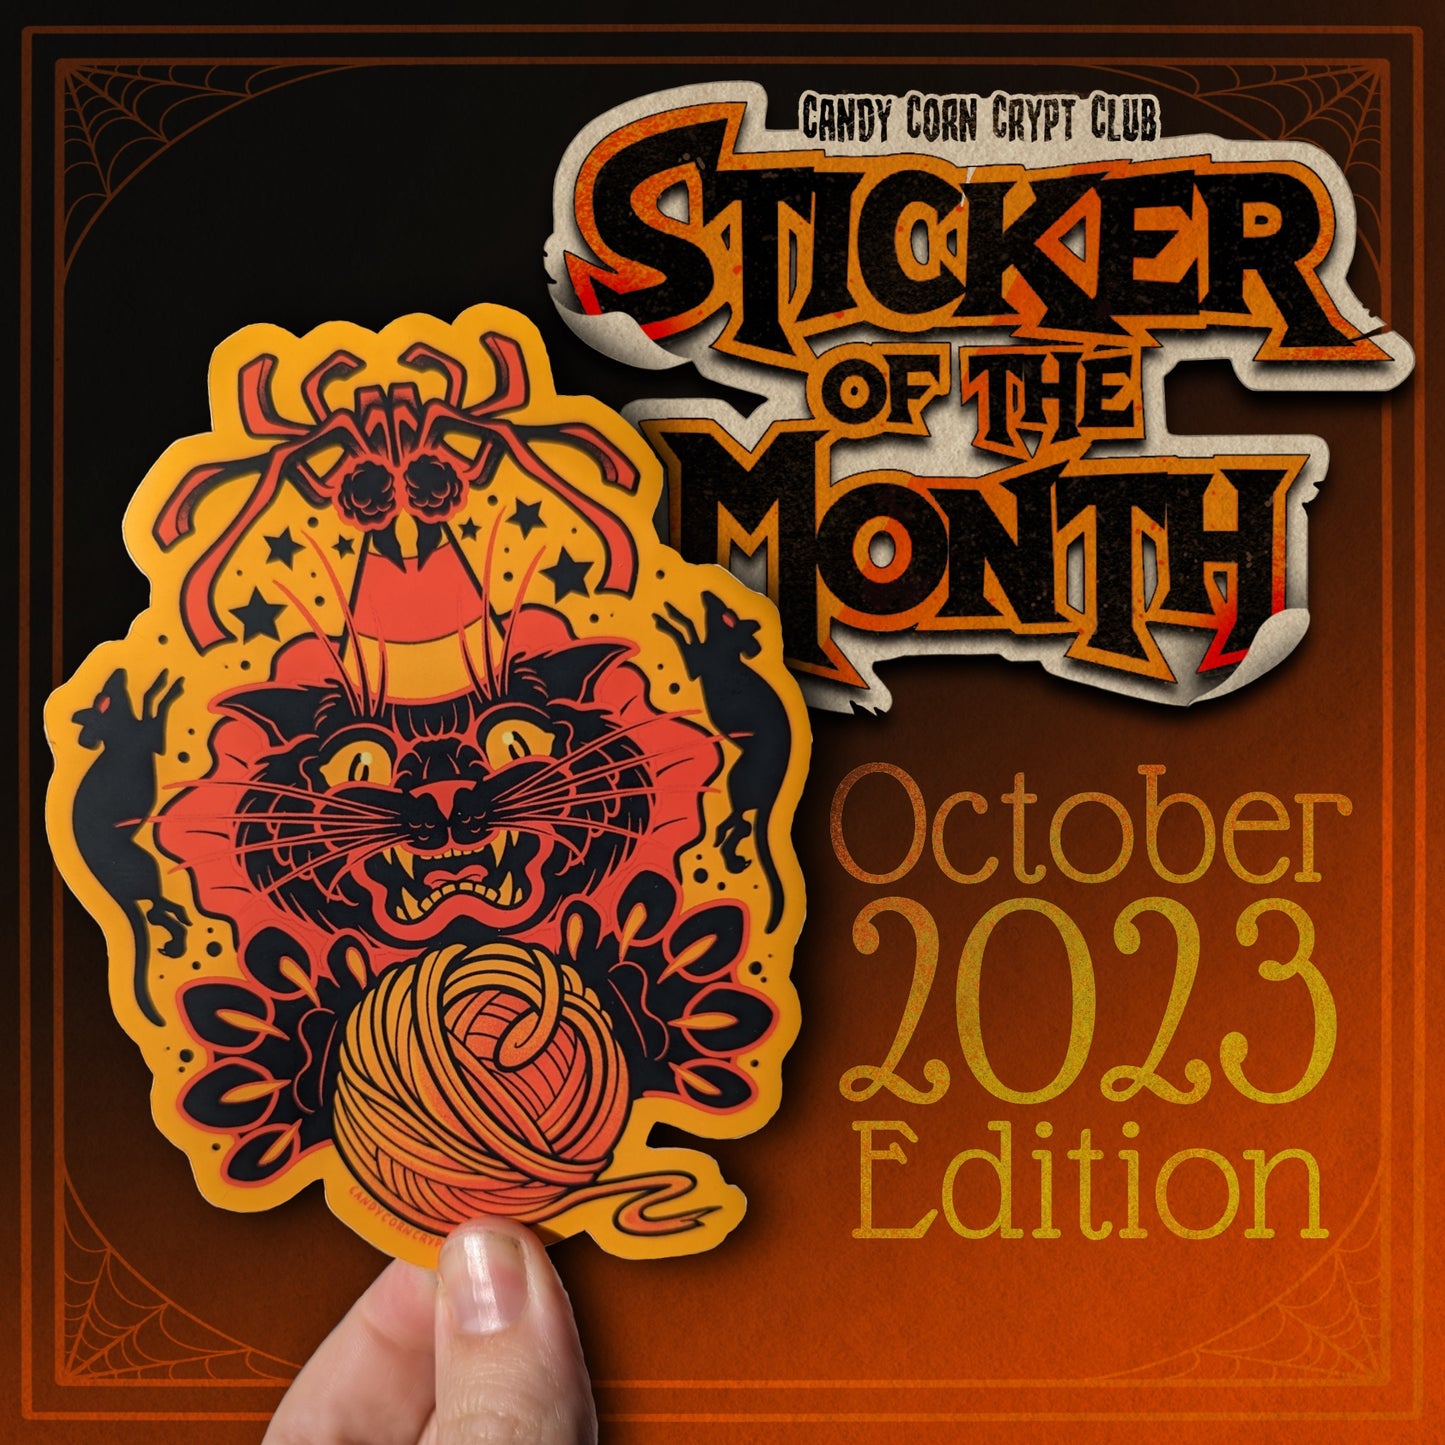 Sticker of the Month #20